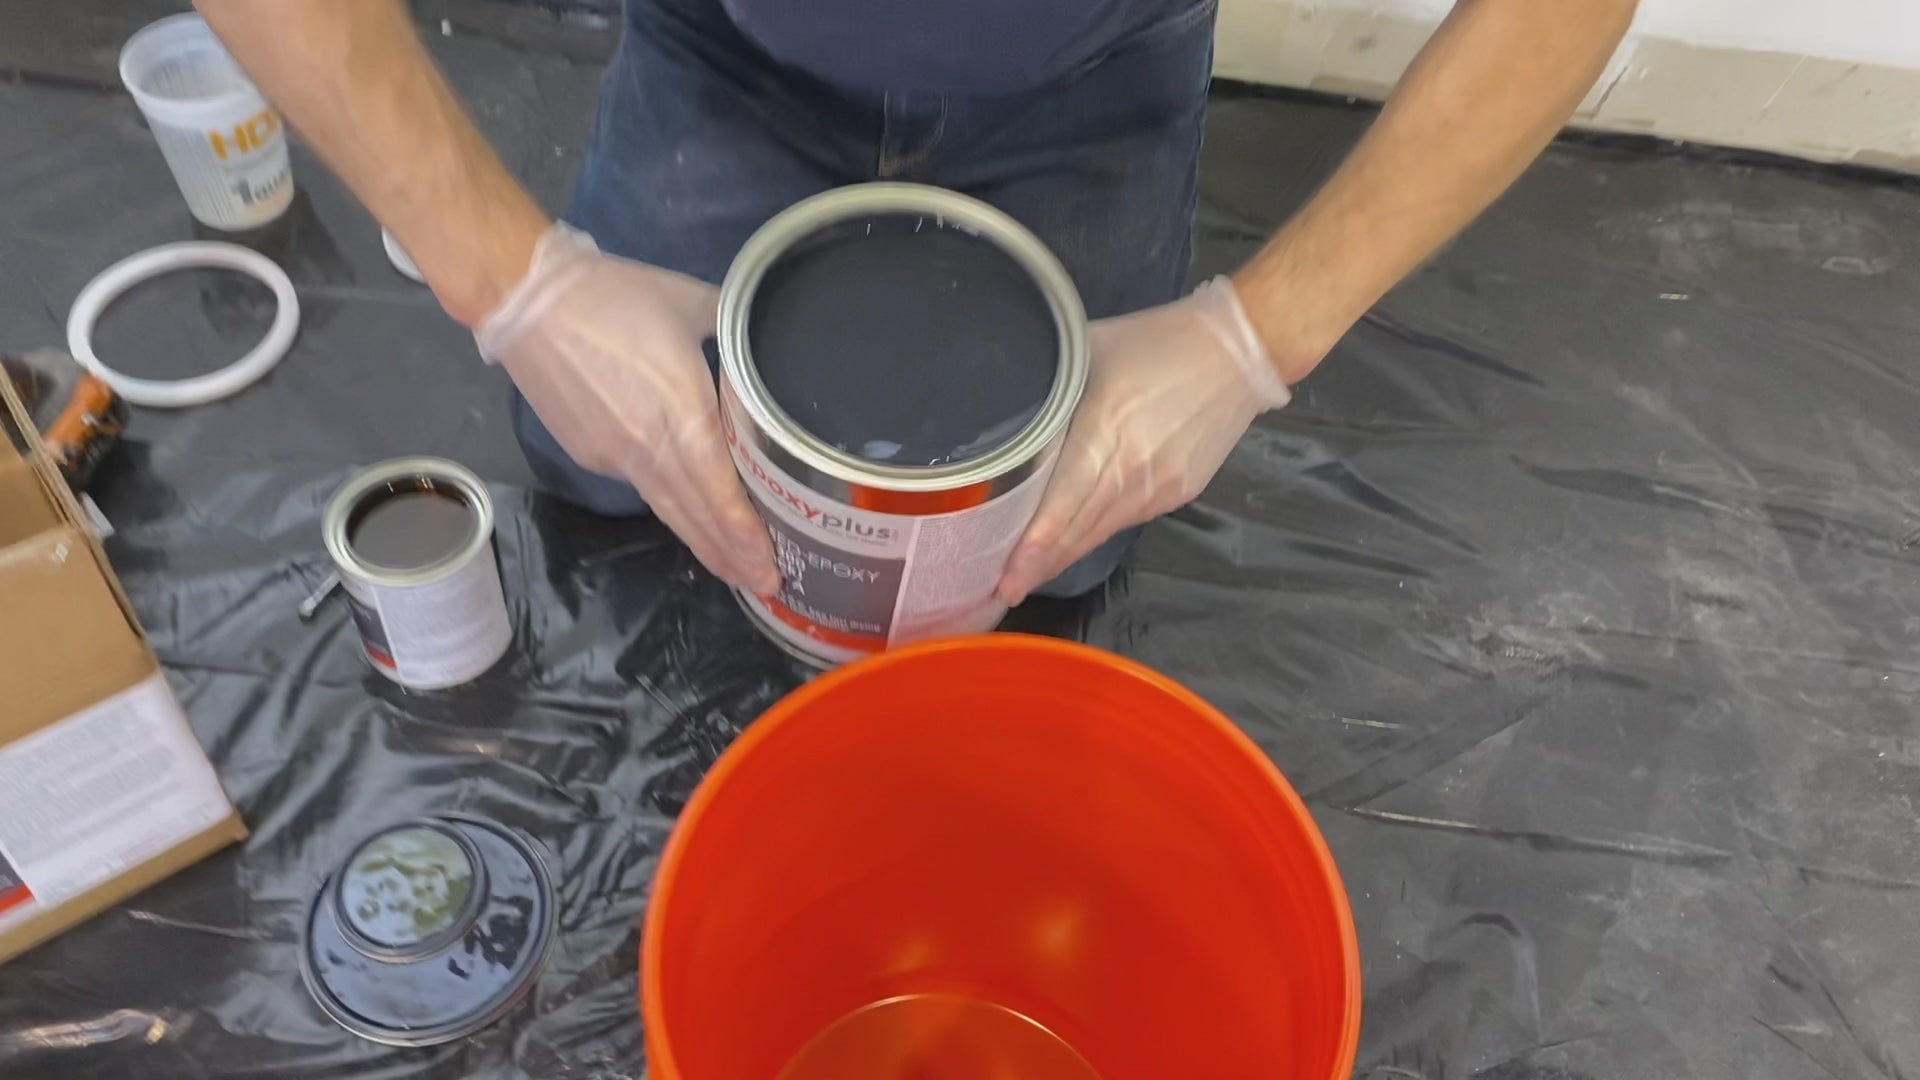 Visualize Perfection: Watch Our Video on White Water-Based Epoxy - 1.25 Gal Kit